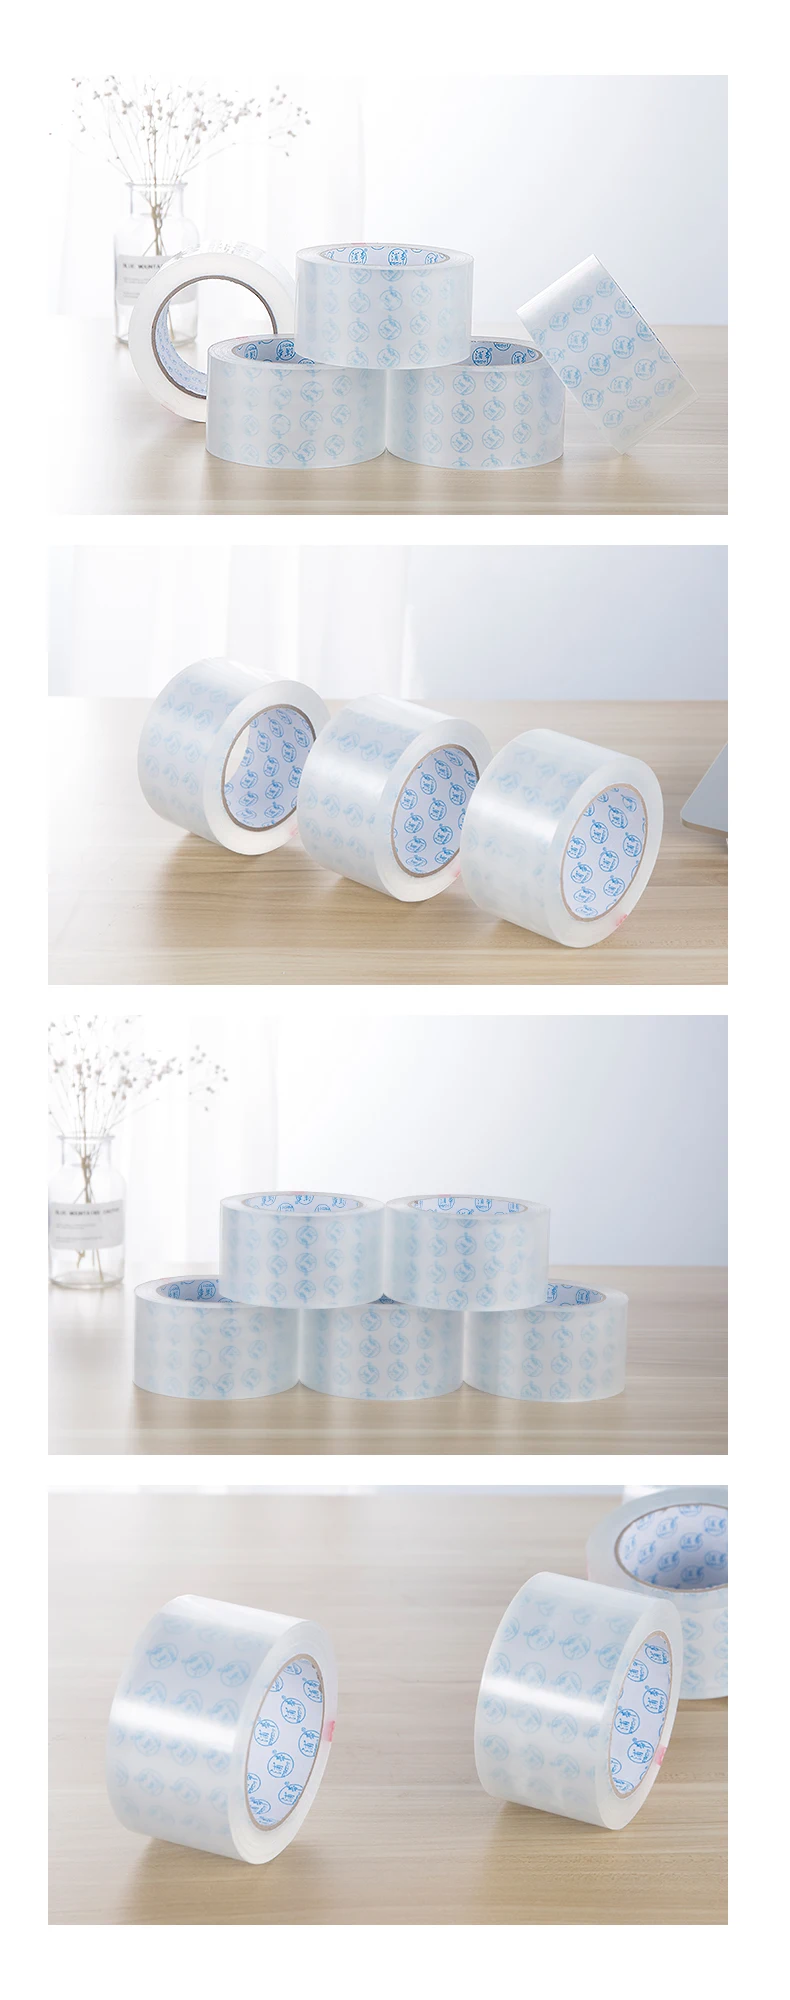 Manufacturing Waterproof Adhesive Tape In Box Packing